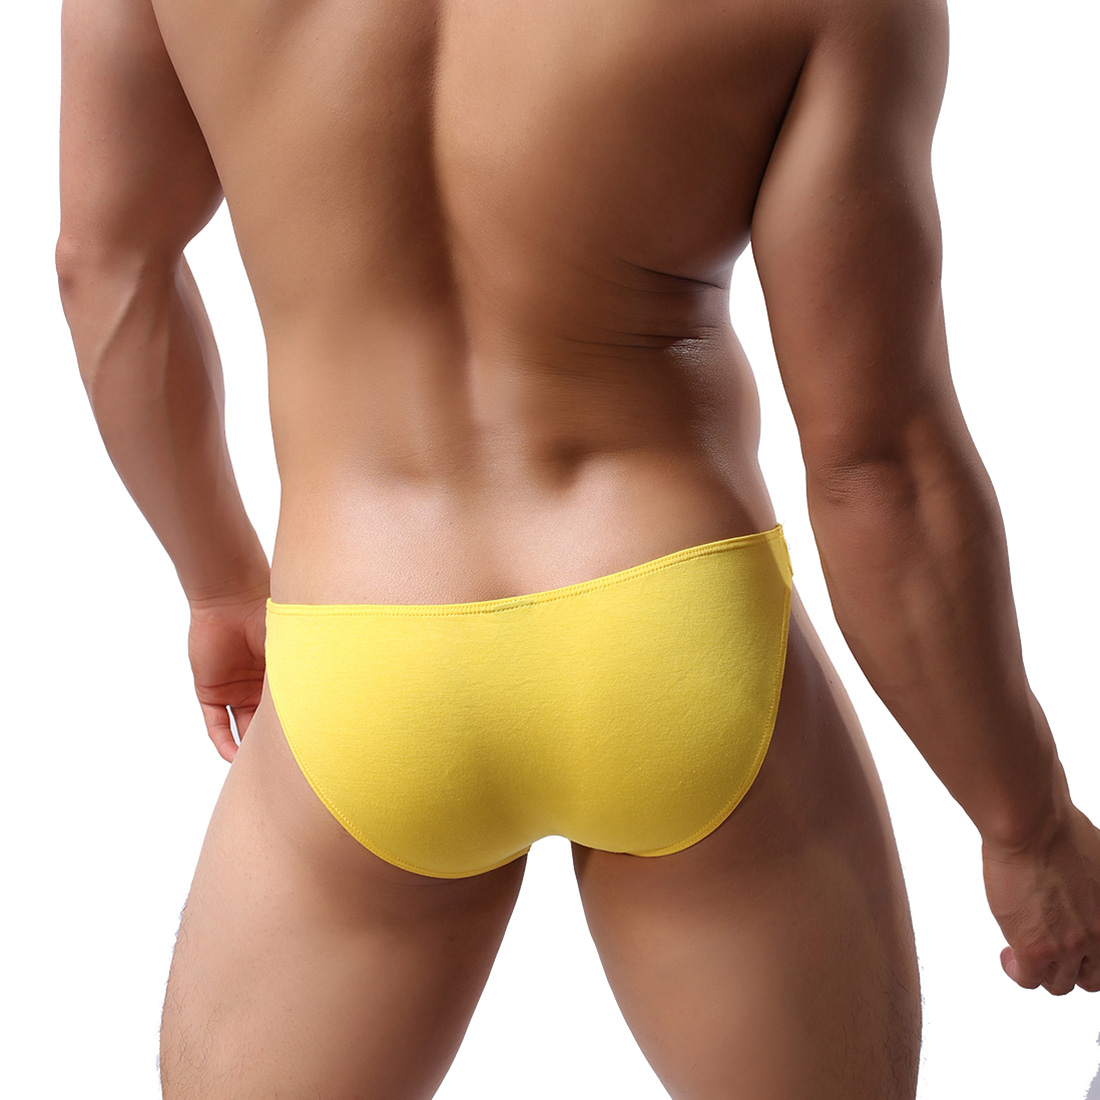 Men's Sexy Lingerie Underwear Modal Triangle Pants Shorts with Penis Sheath WH8 Yellow L